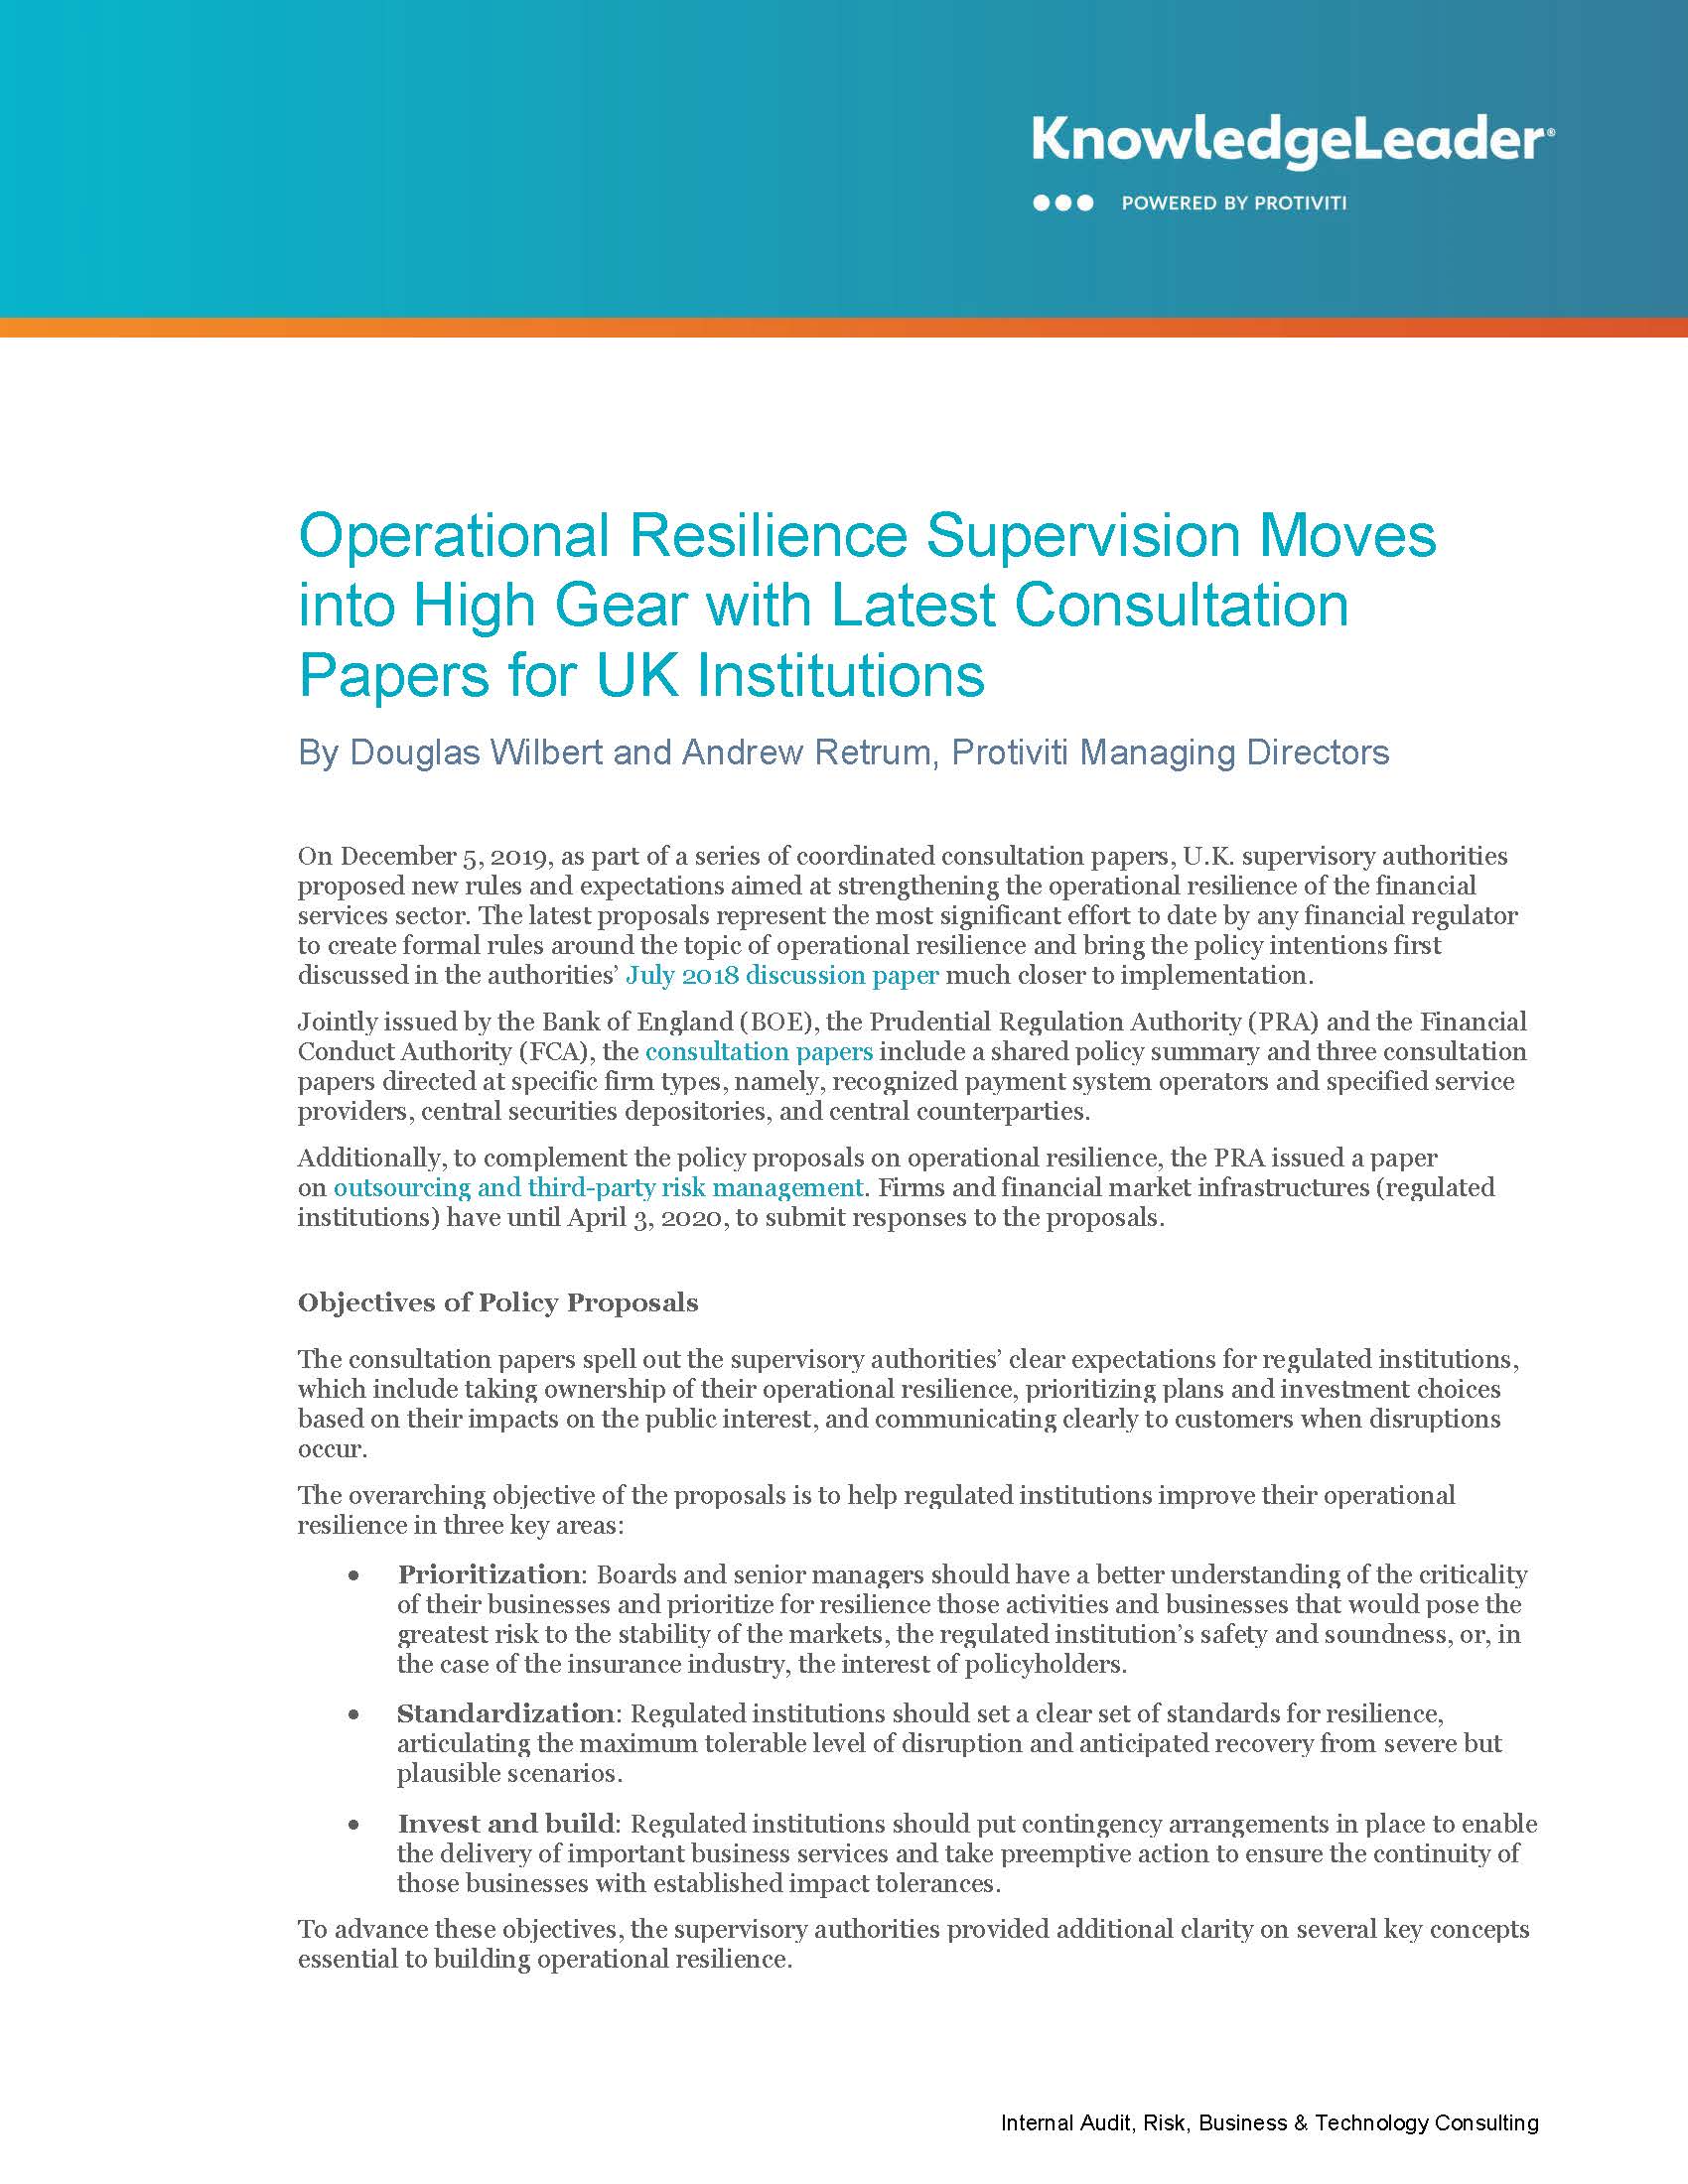 Screenshot of the first page of Operational Resilience Supervision Moves into High Gear with Latest Consultation Papers for UK Institutions